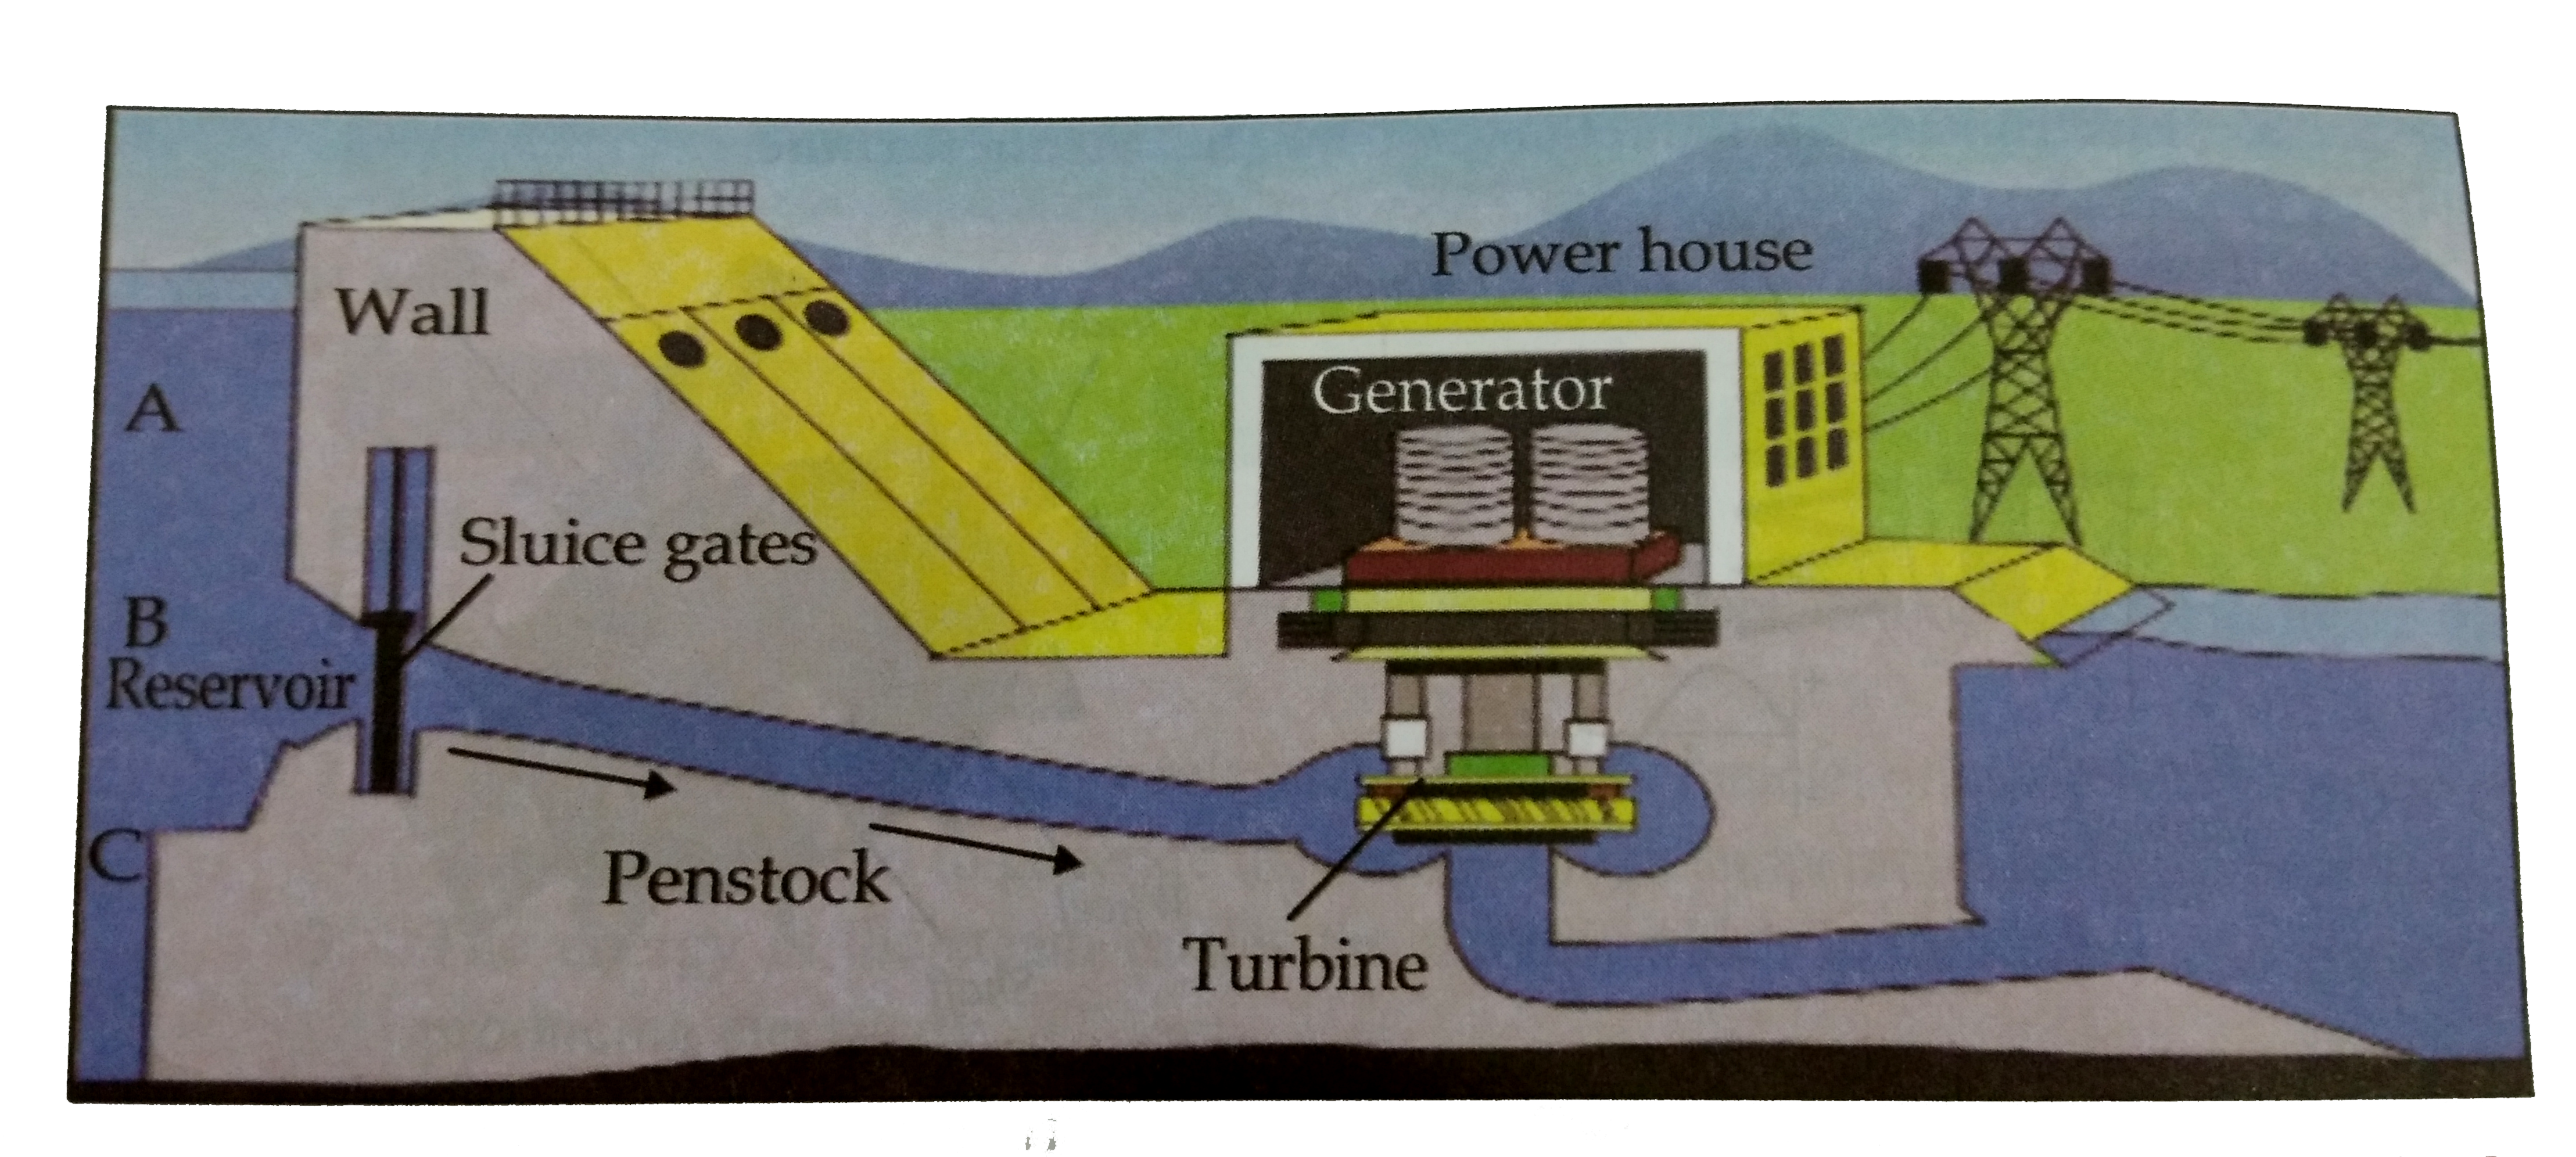 With referenc e to point B , potential energy of how much water reservoir in the  dam will be converted into kinetic energy ?